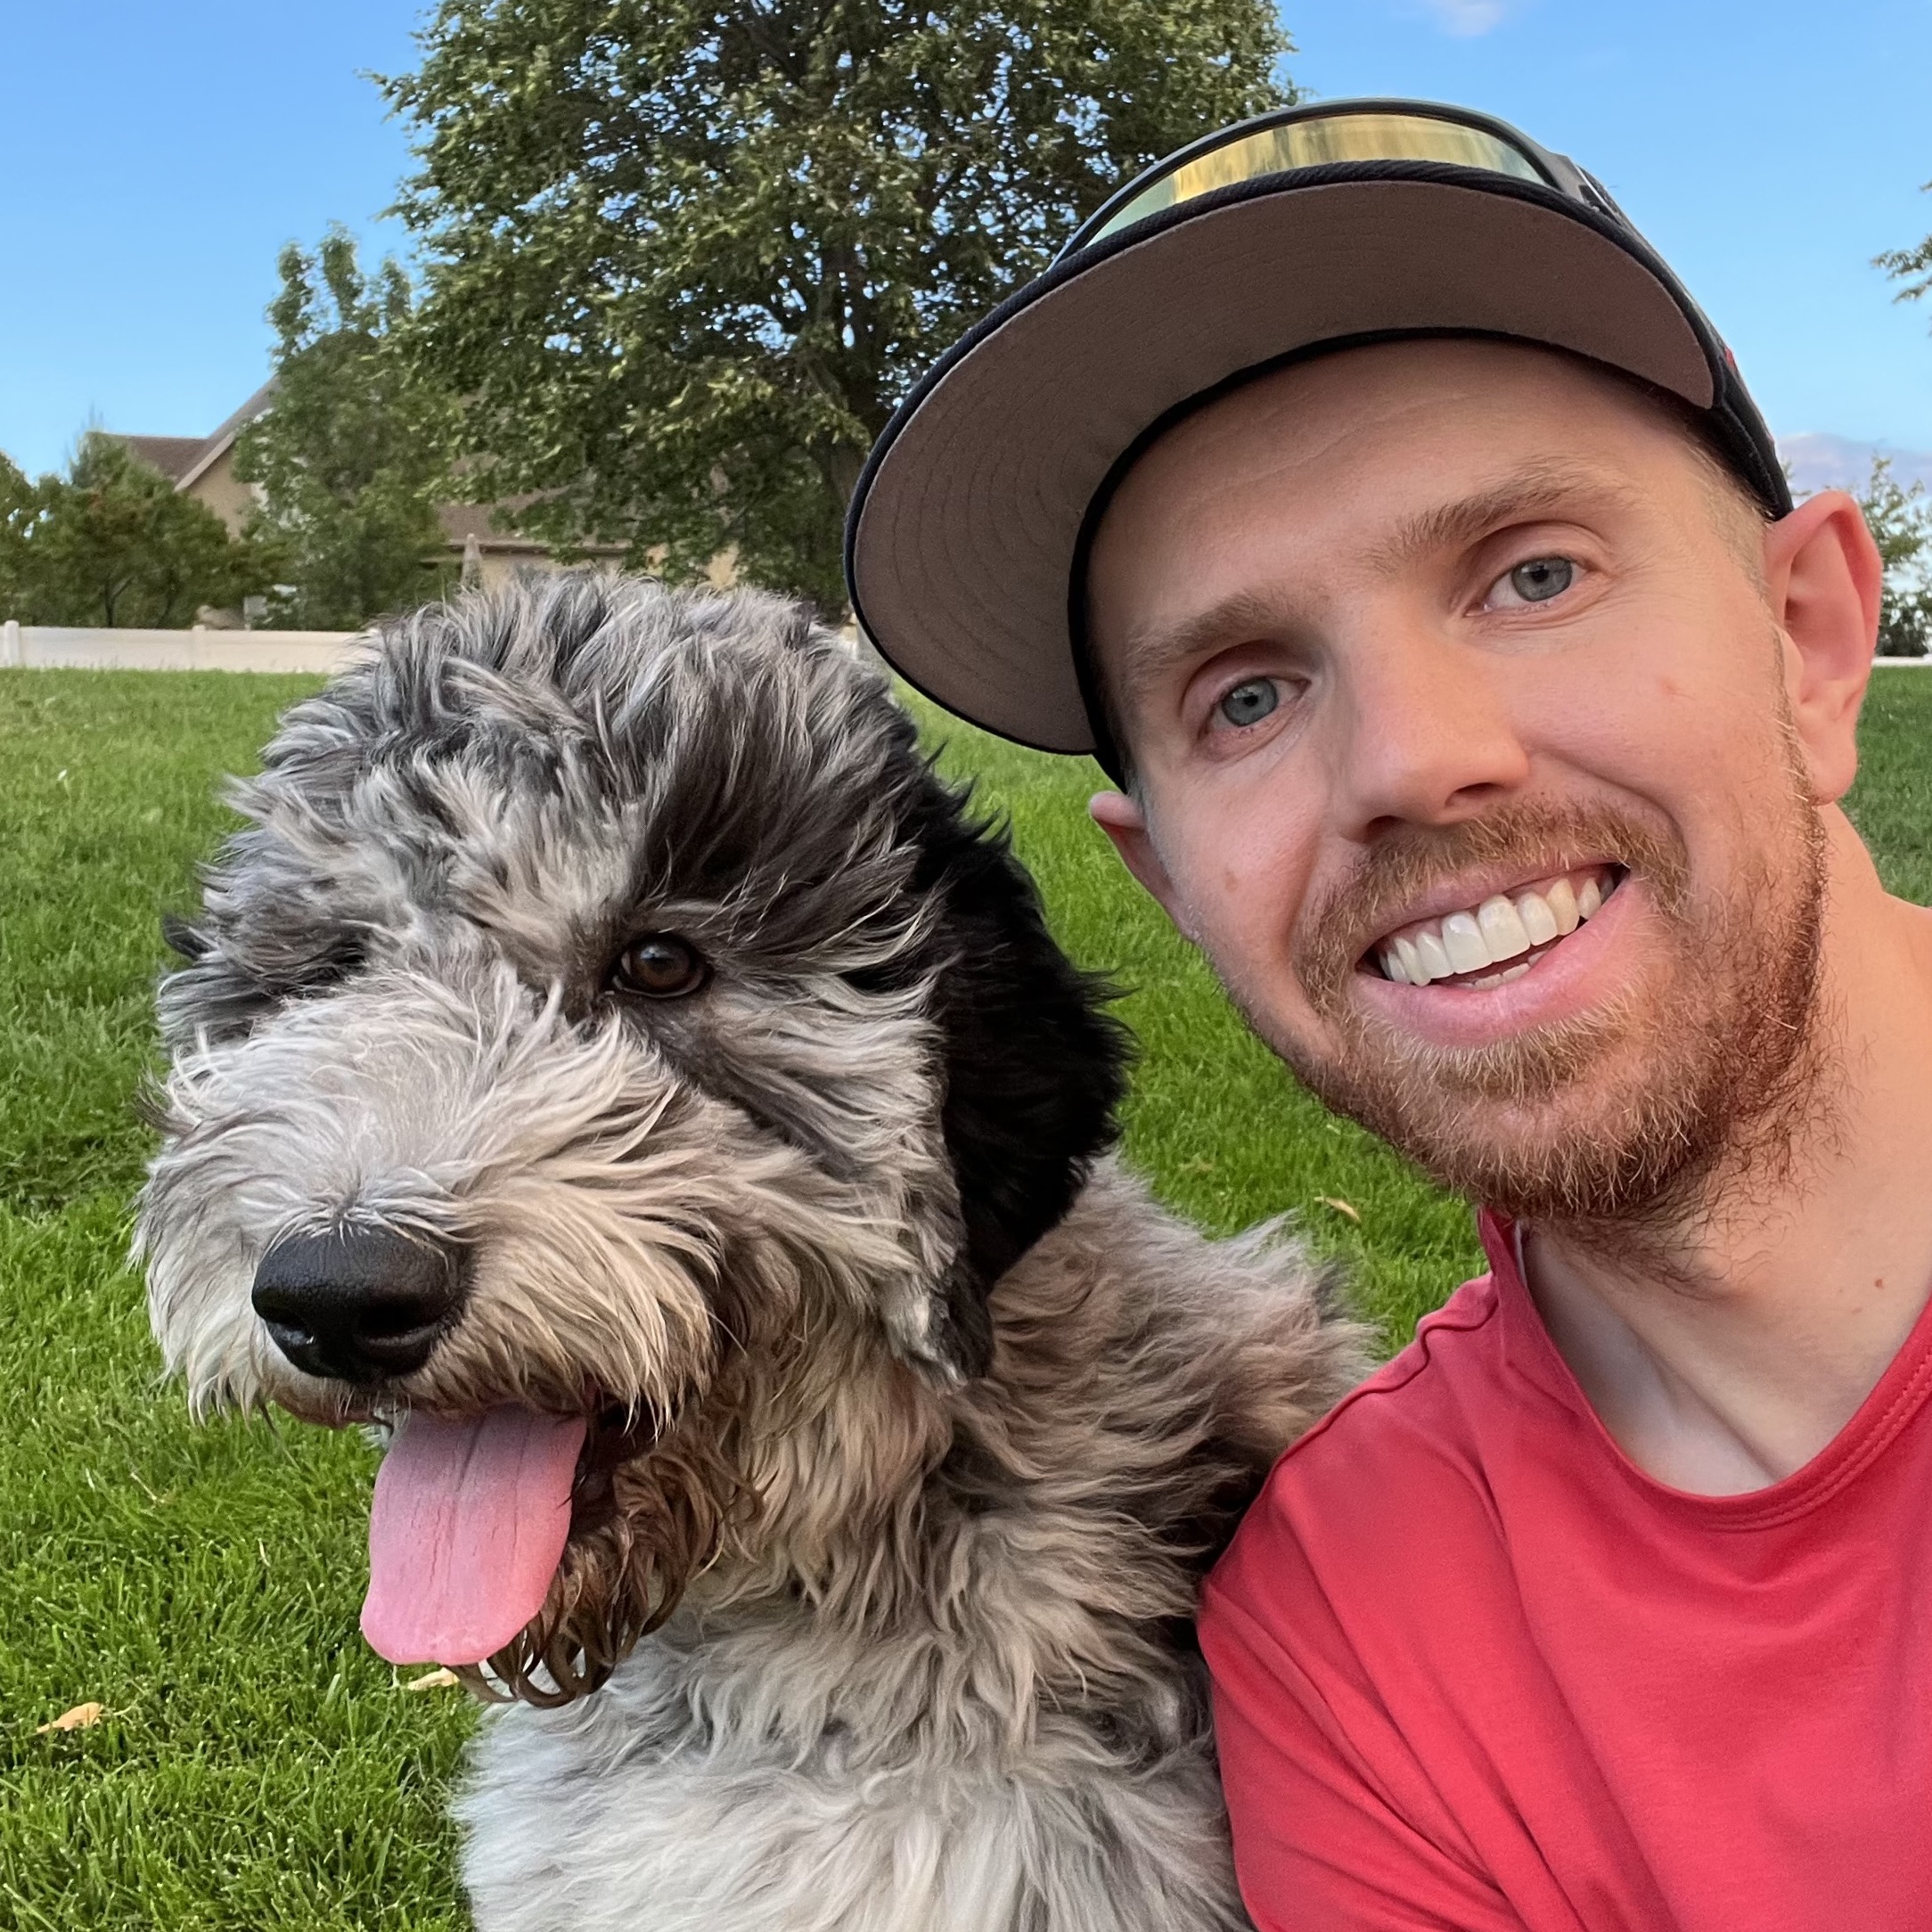 A selfie of my dog Dutch and I on a sunny, windy day with greenery in the background with his tongue hanging out of his mouth